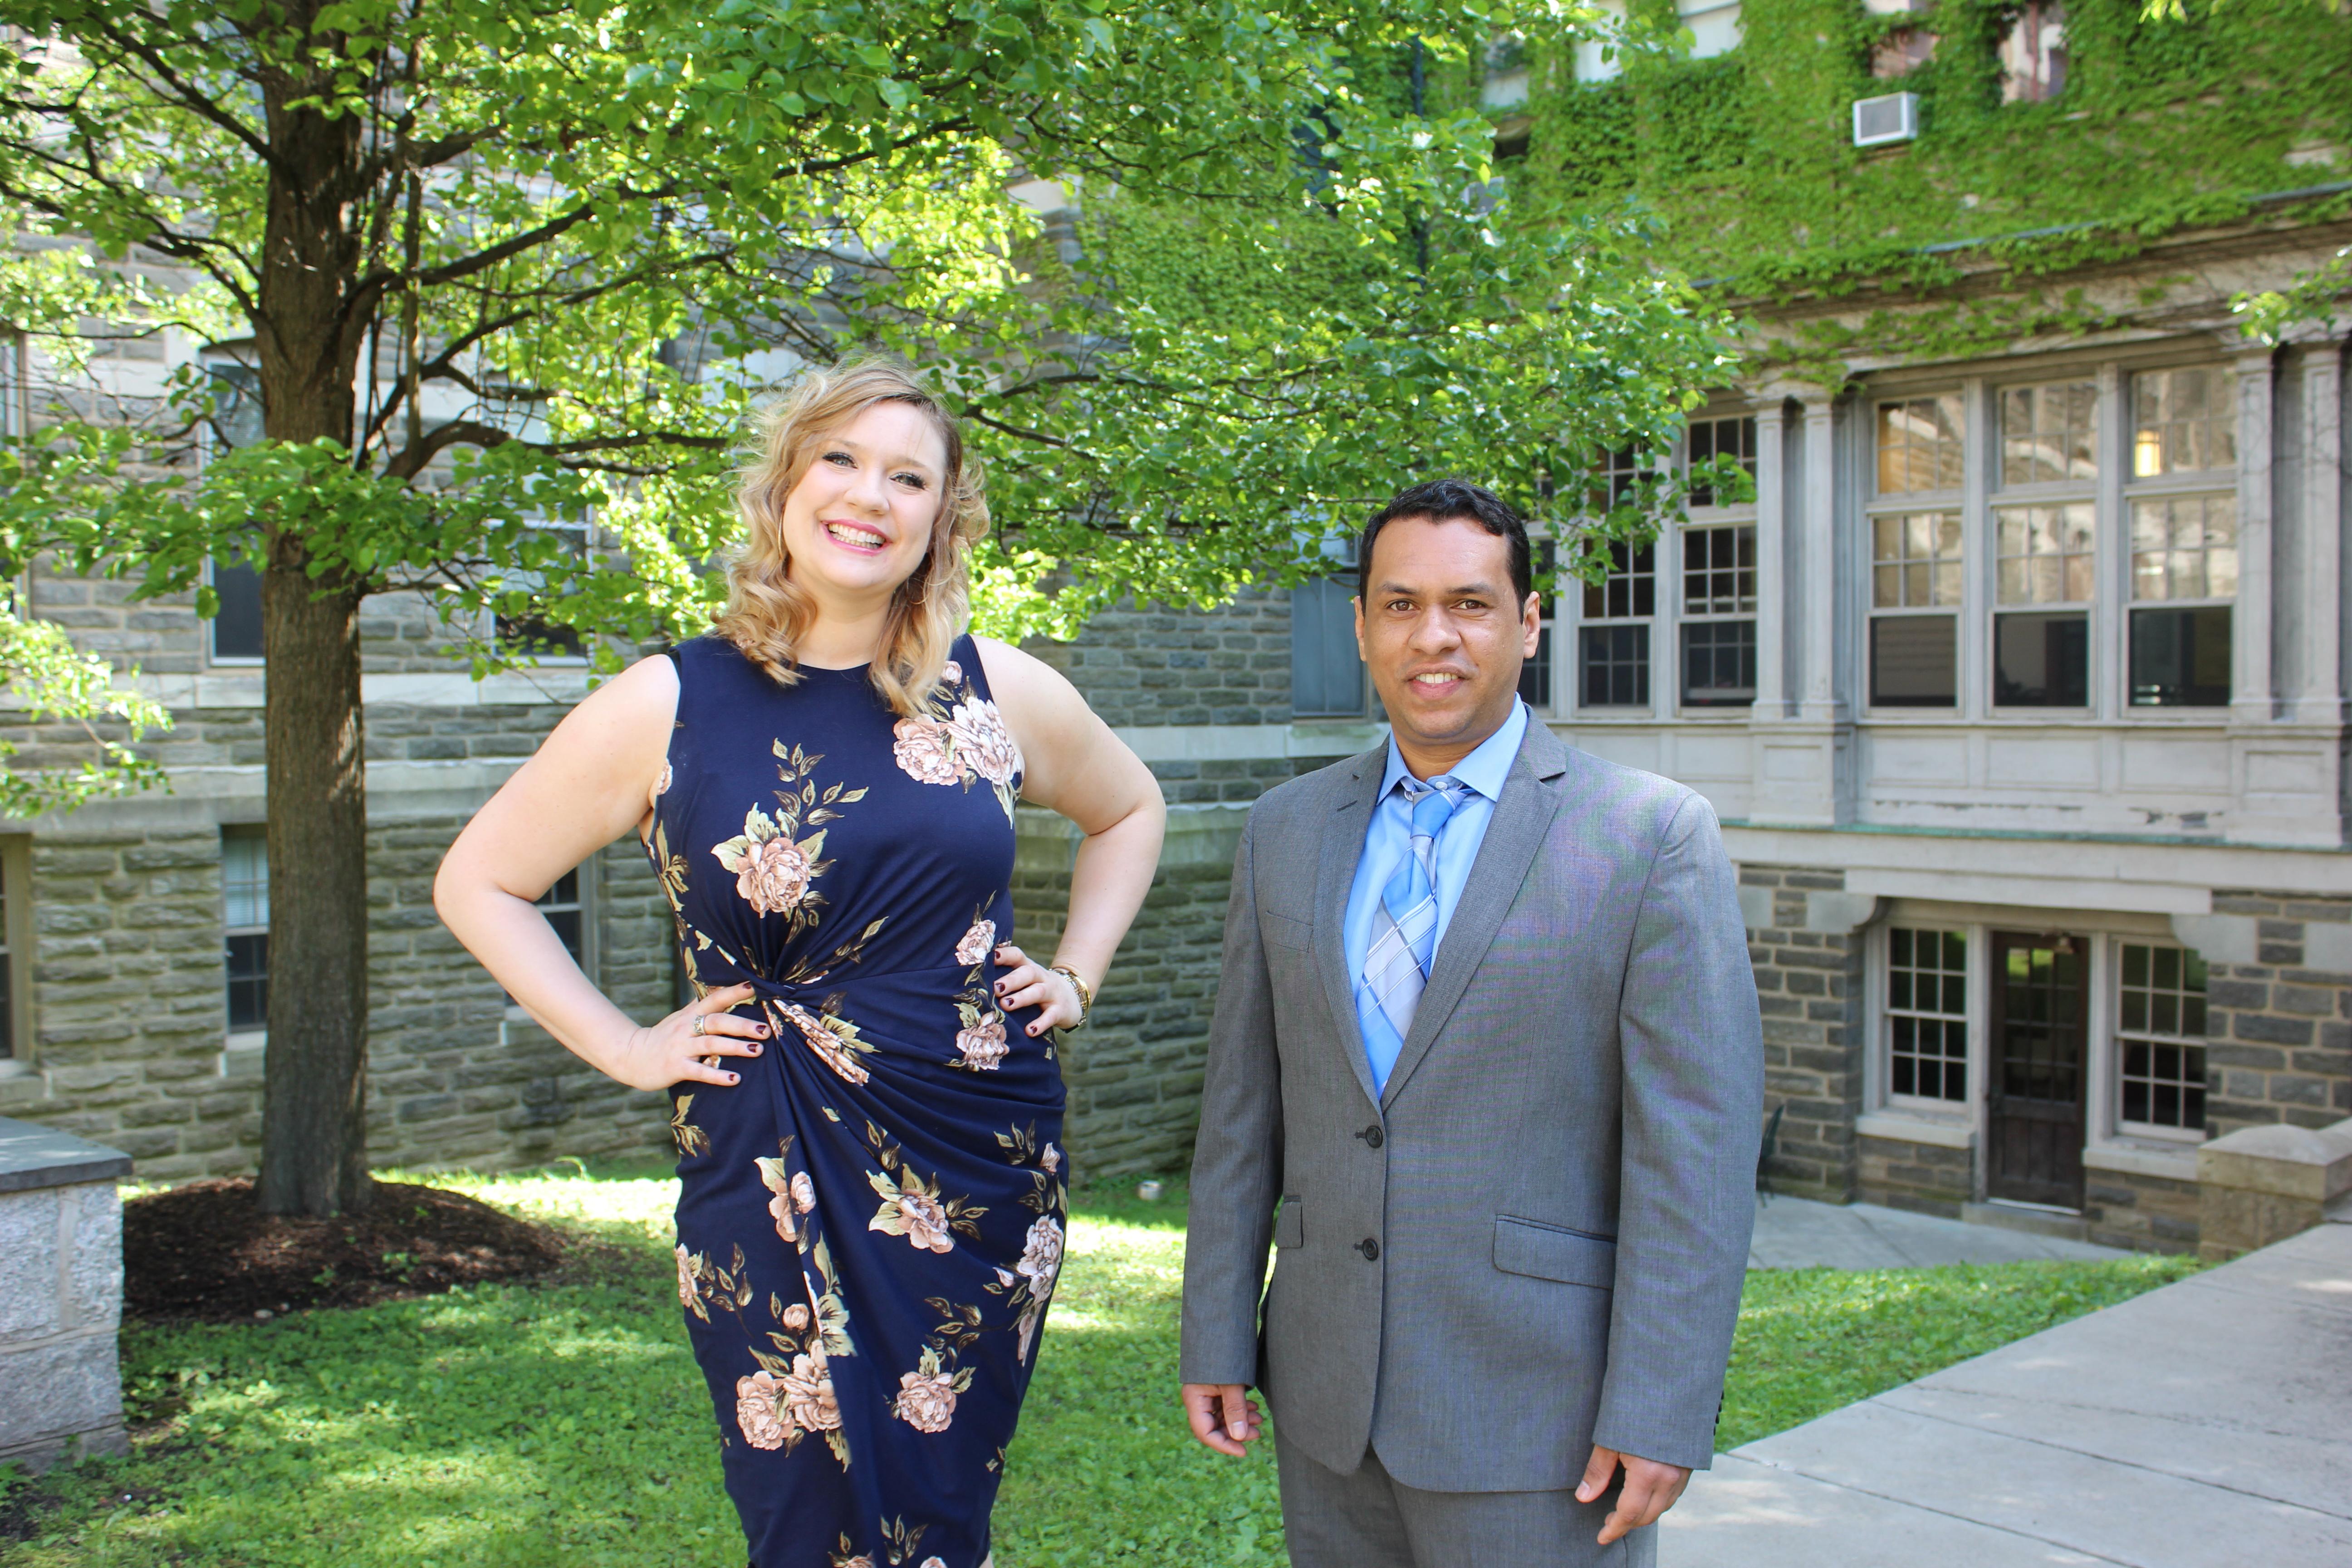 Man in suit and woman in pose in front of campus buildilng